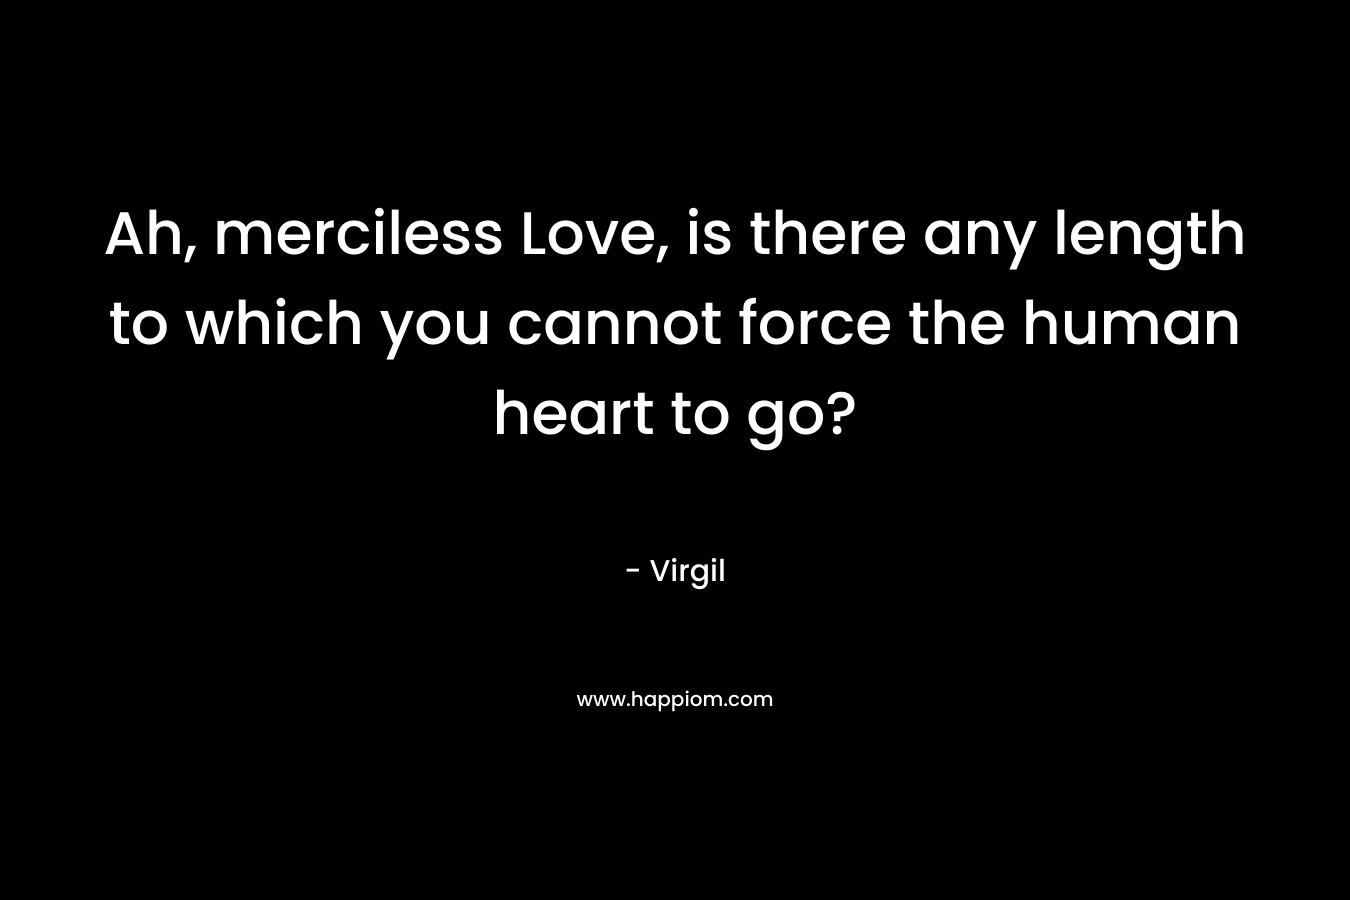 Ah, merciless Love, is there any length to which you cannot force the human heart to go? – Virgil